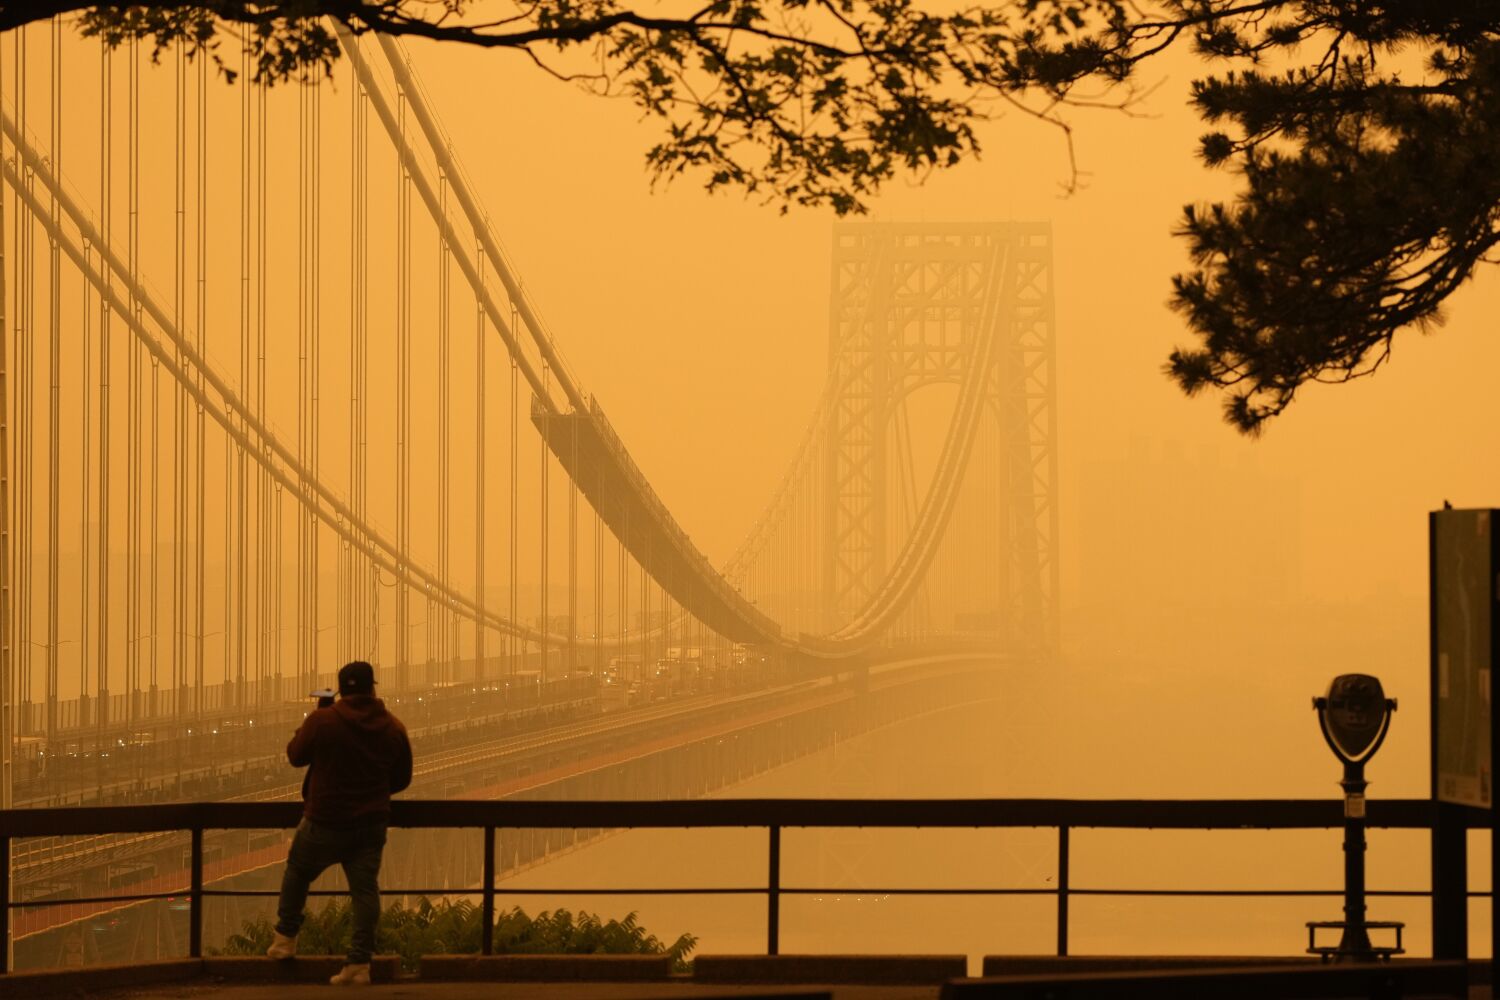 Unhealthy air, smoke continue to cover large swaths of U.S. for third straight day